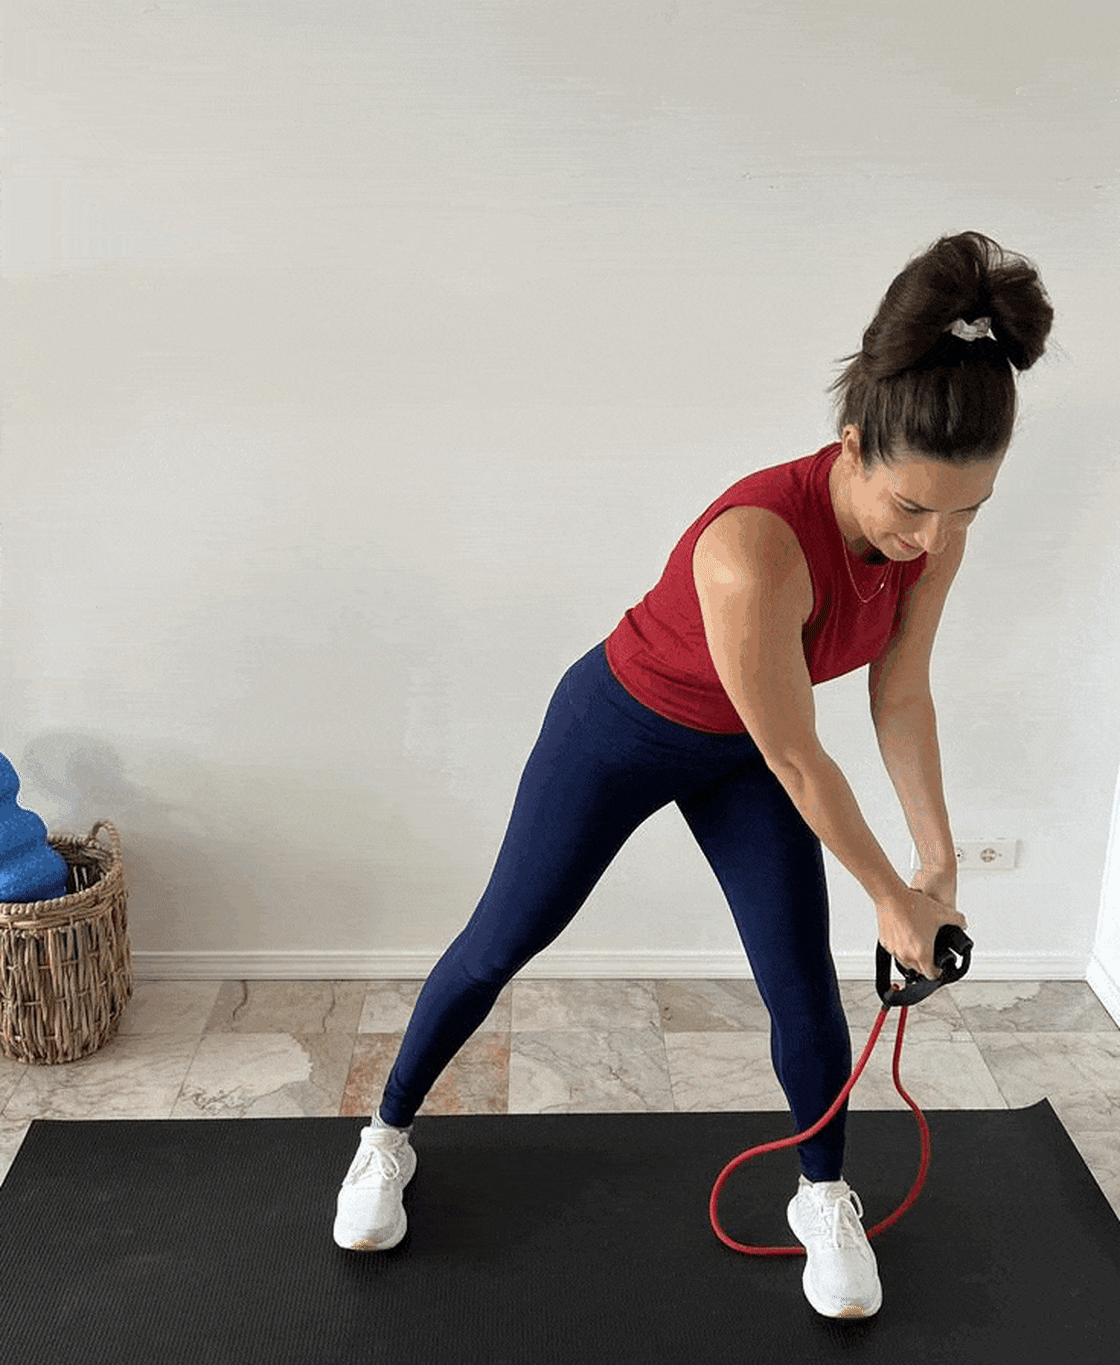 7 Best Resistance Band Exercises to Fix Back Pain